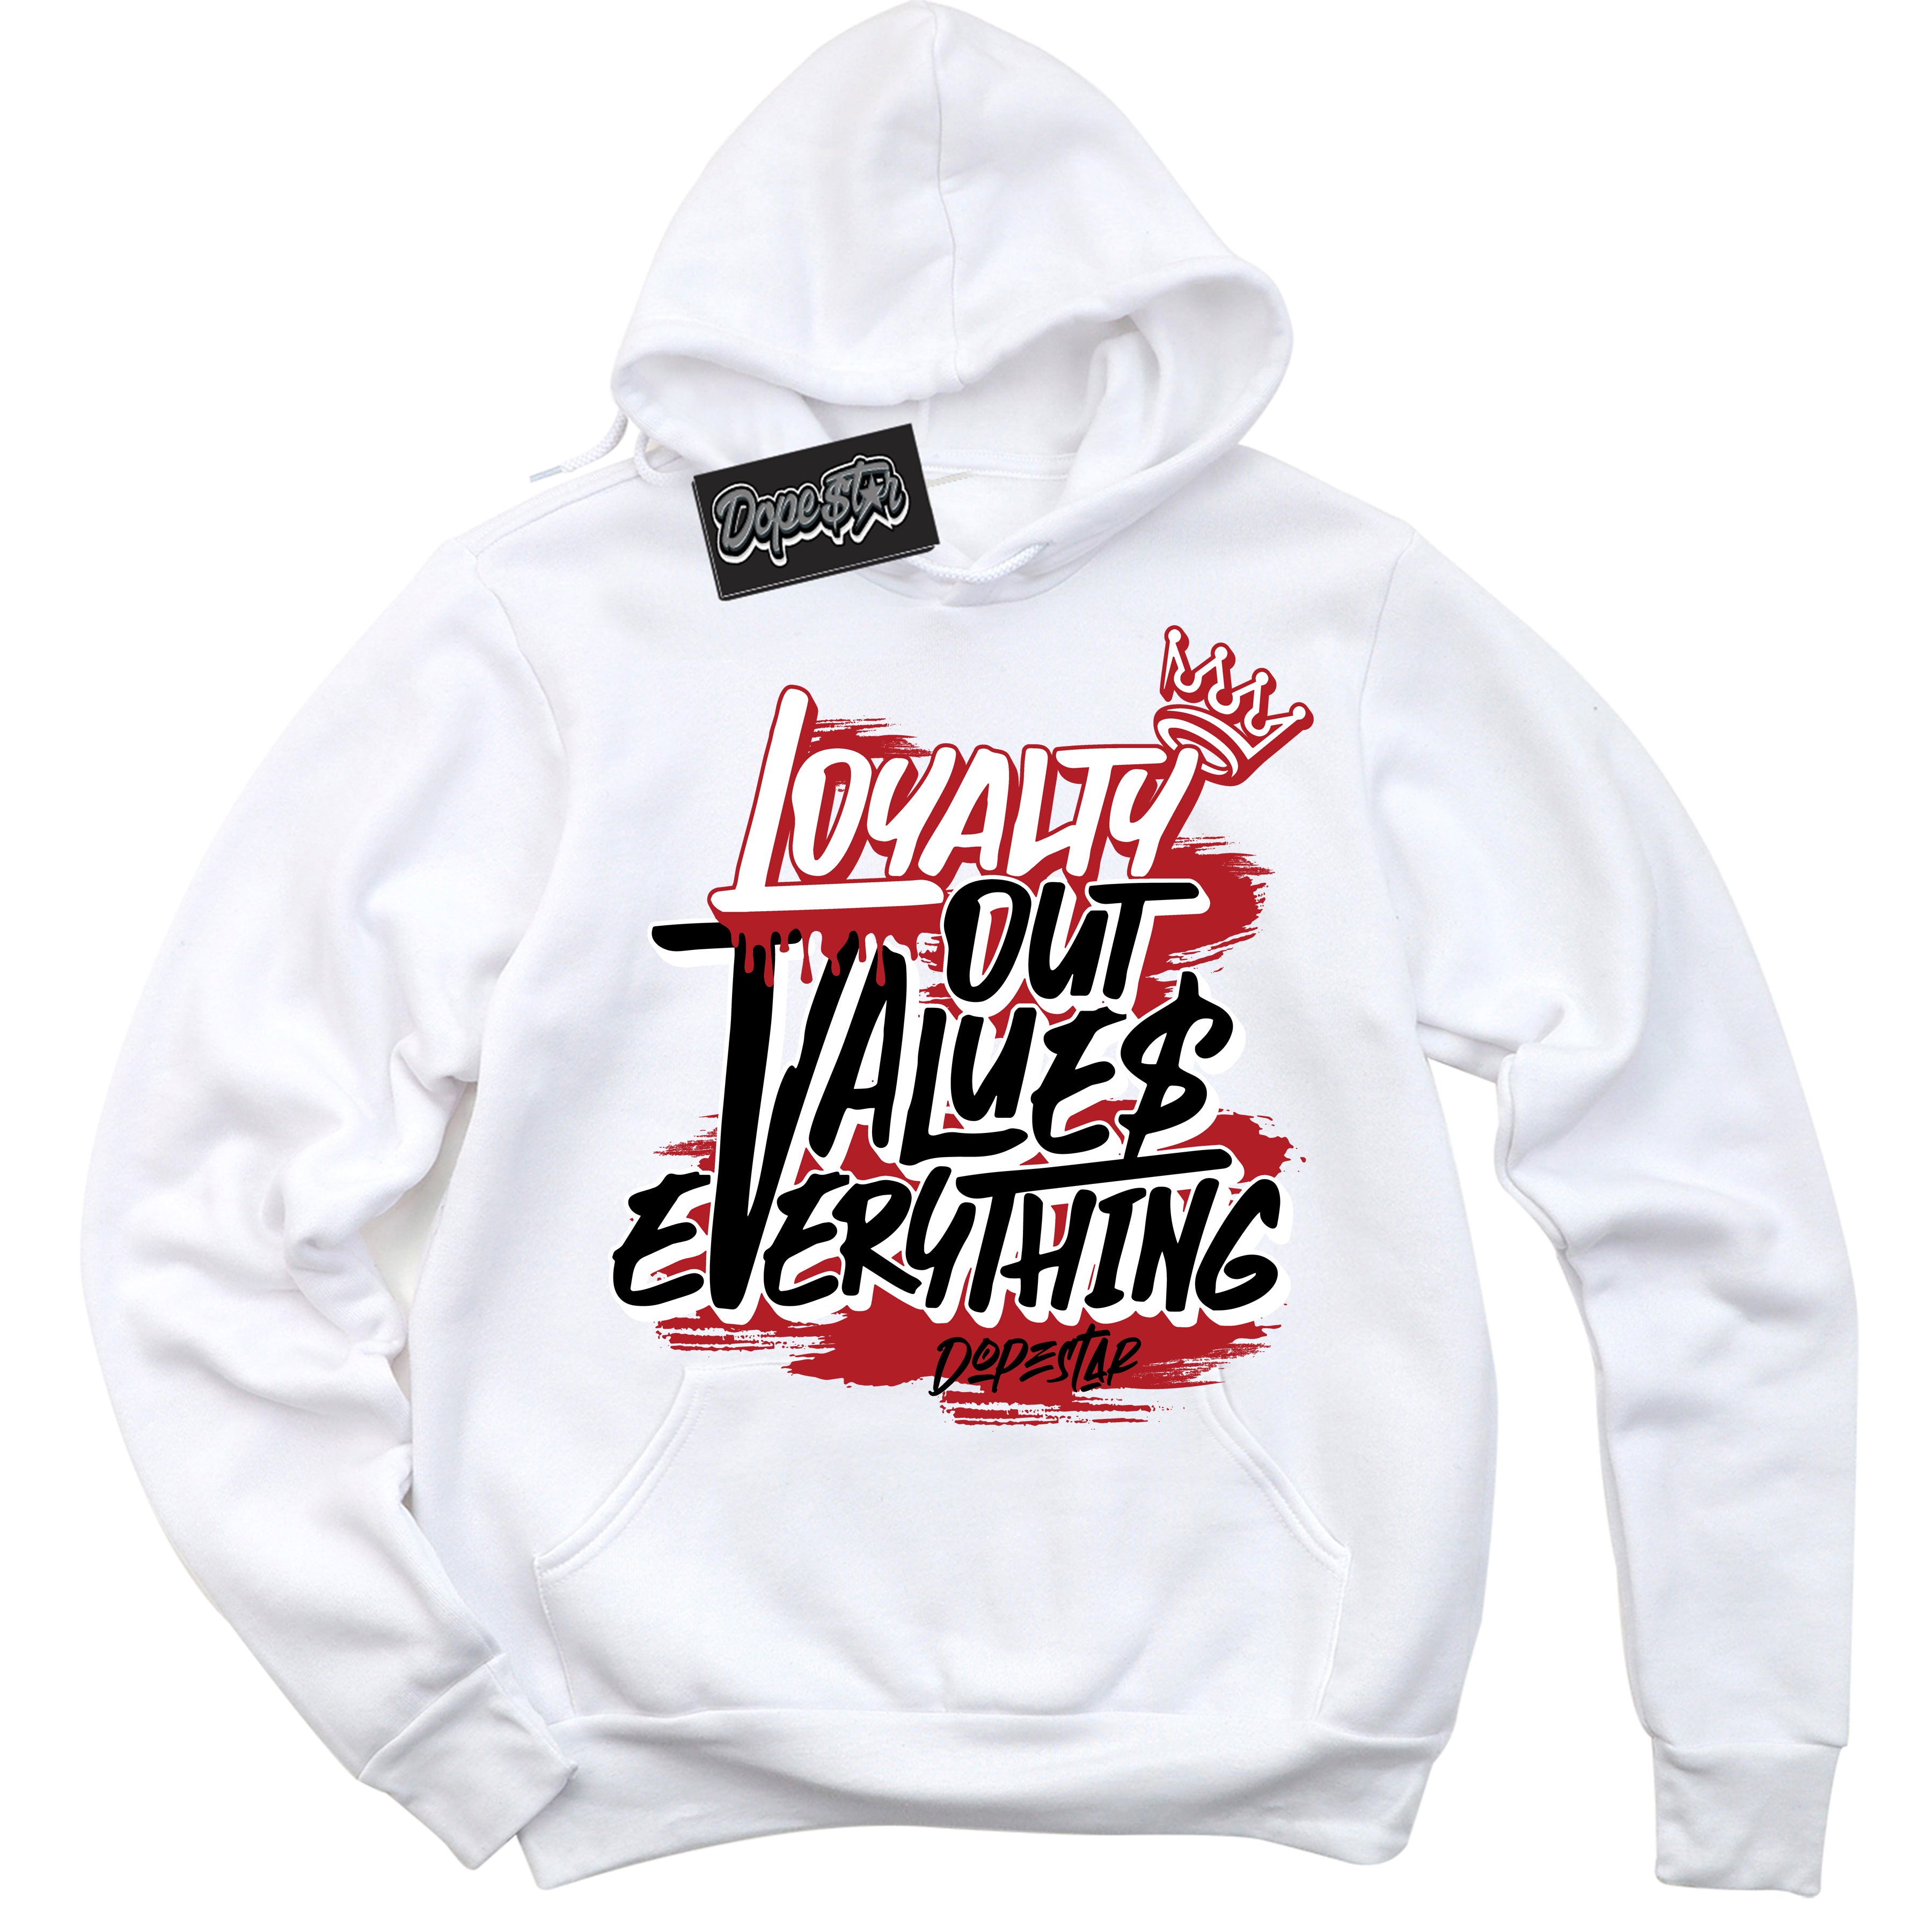 Cool White Hoodie with “ Loyalty Out Values Everything ”  design that Perfectly Matches Alternate Bred Toe 1s Sneakers.